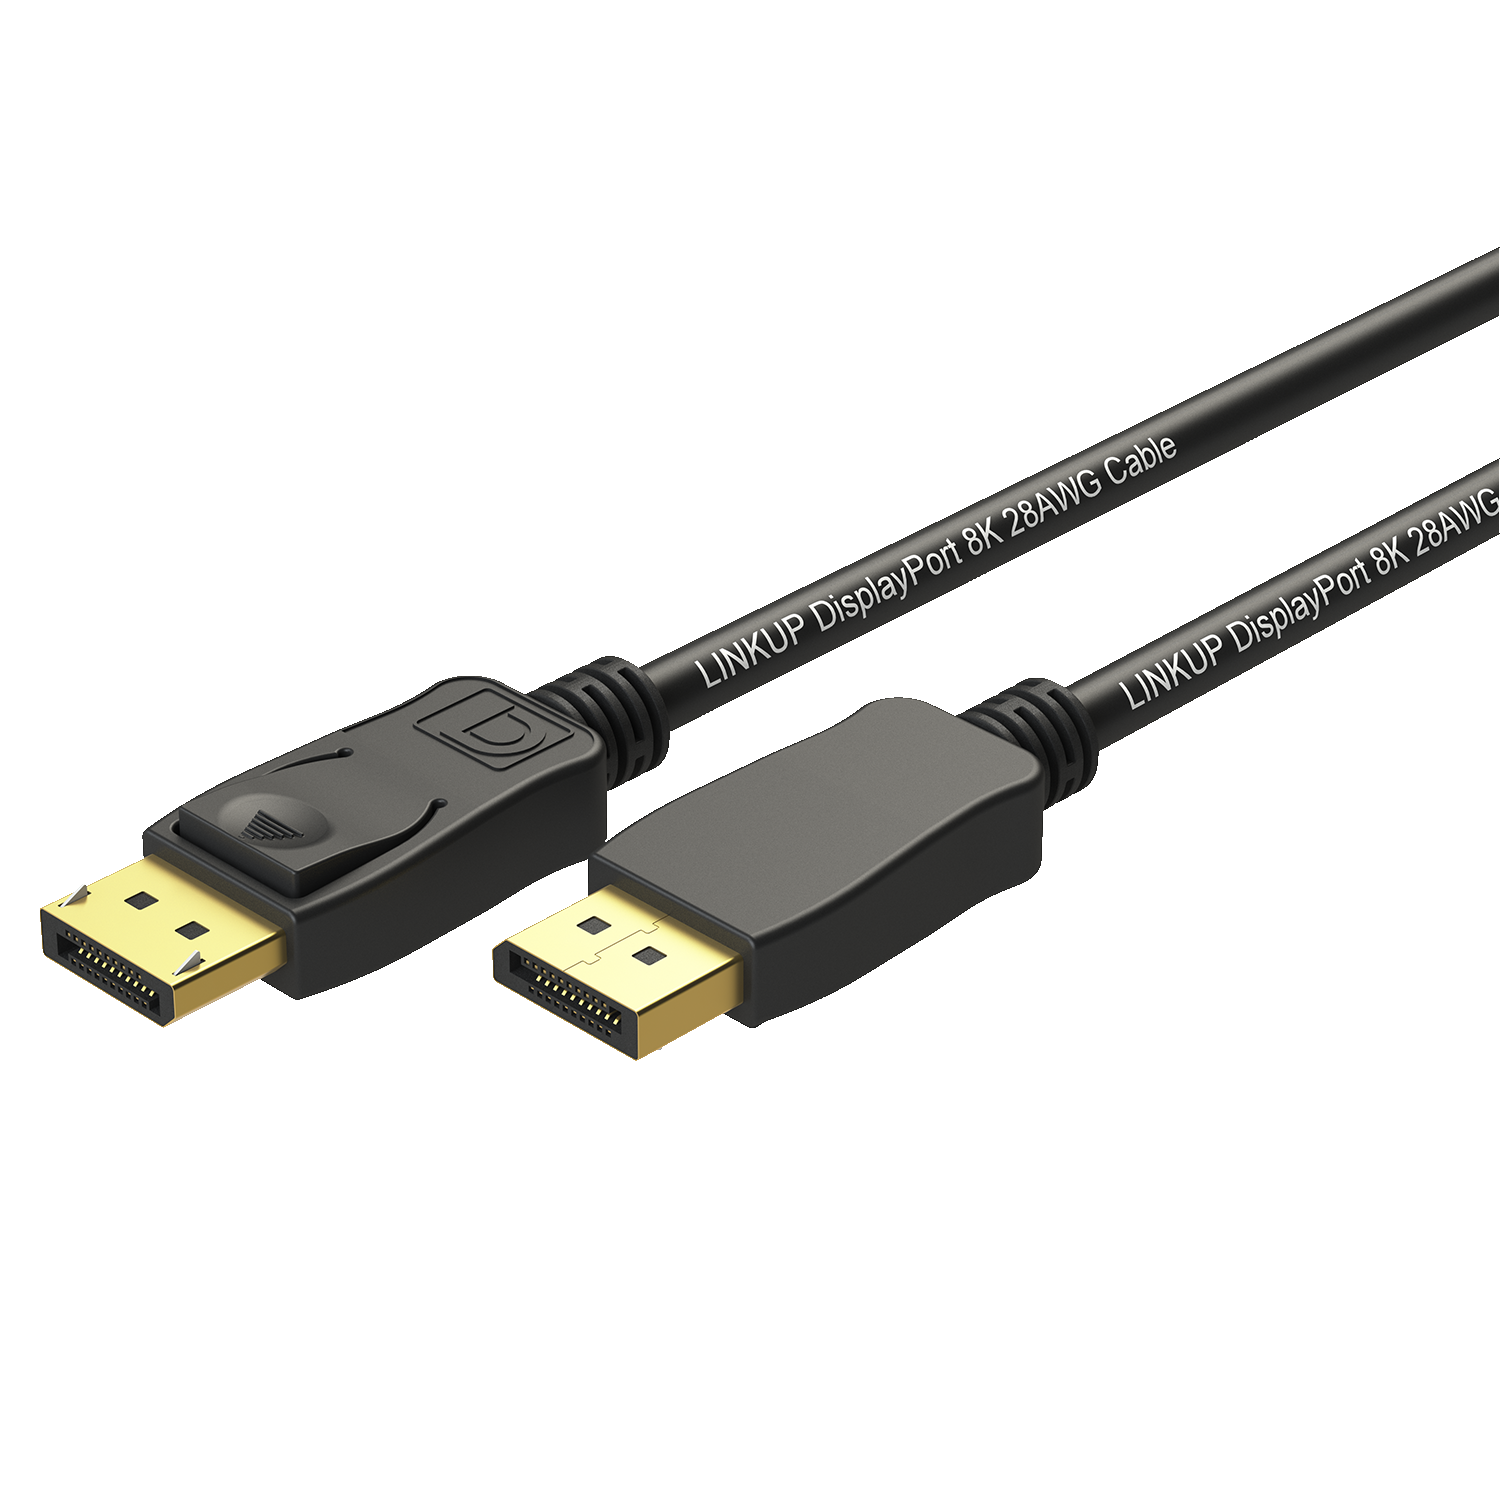 Linkup Displayport 1 4 Dp8k Cable Hbr3 Dsc 1 2 1440p 144hz Extreme High Speed Gold Plated 34awg Flexible 15 Ft Best Buy Canada